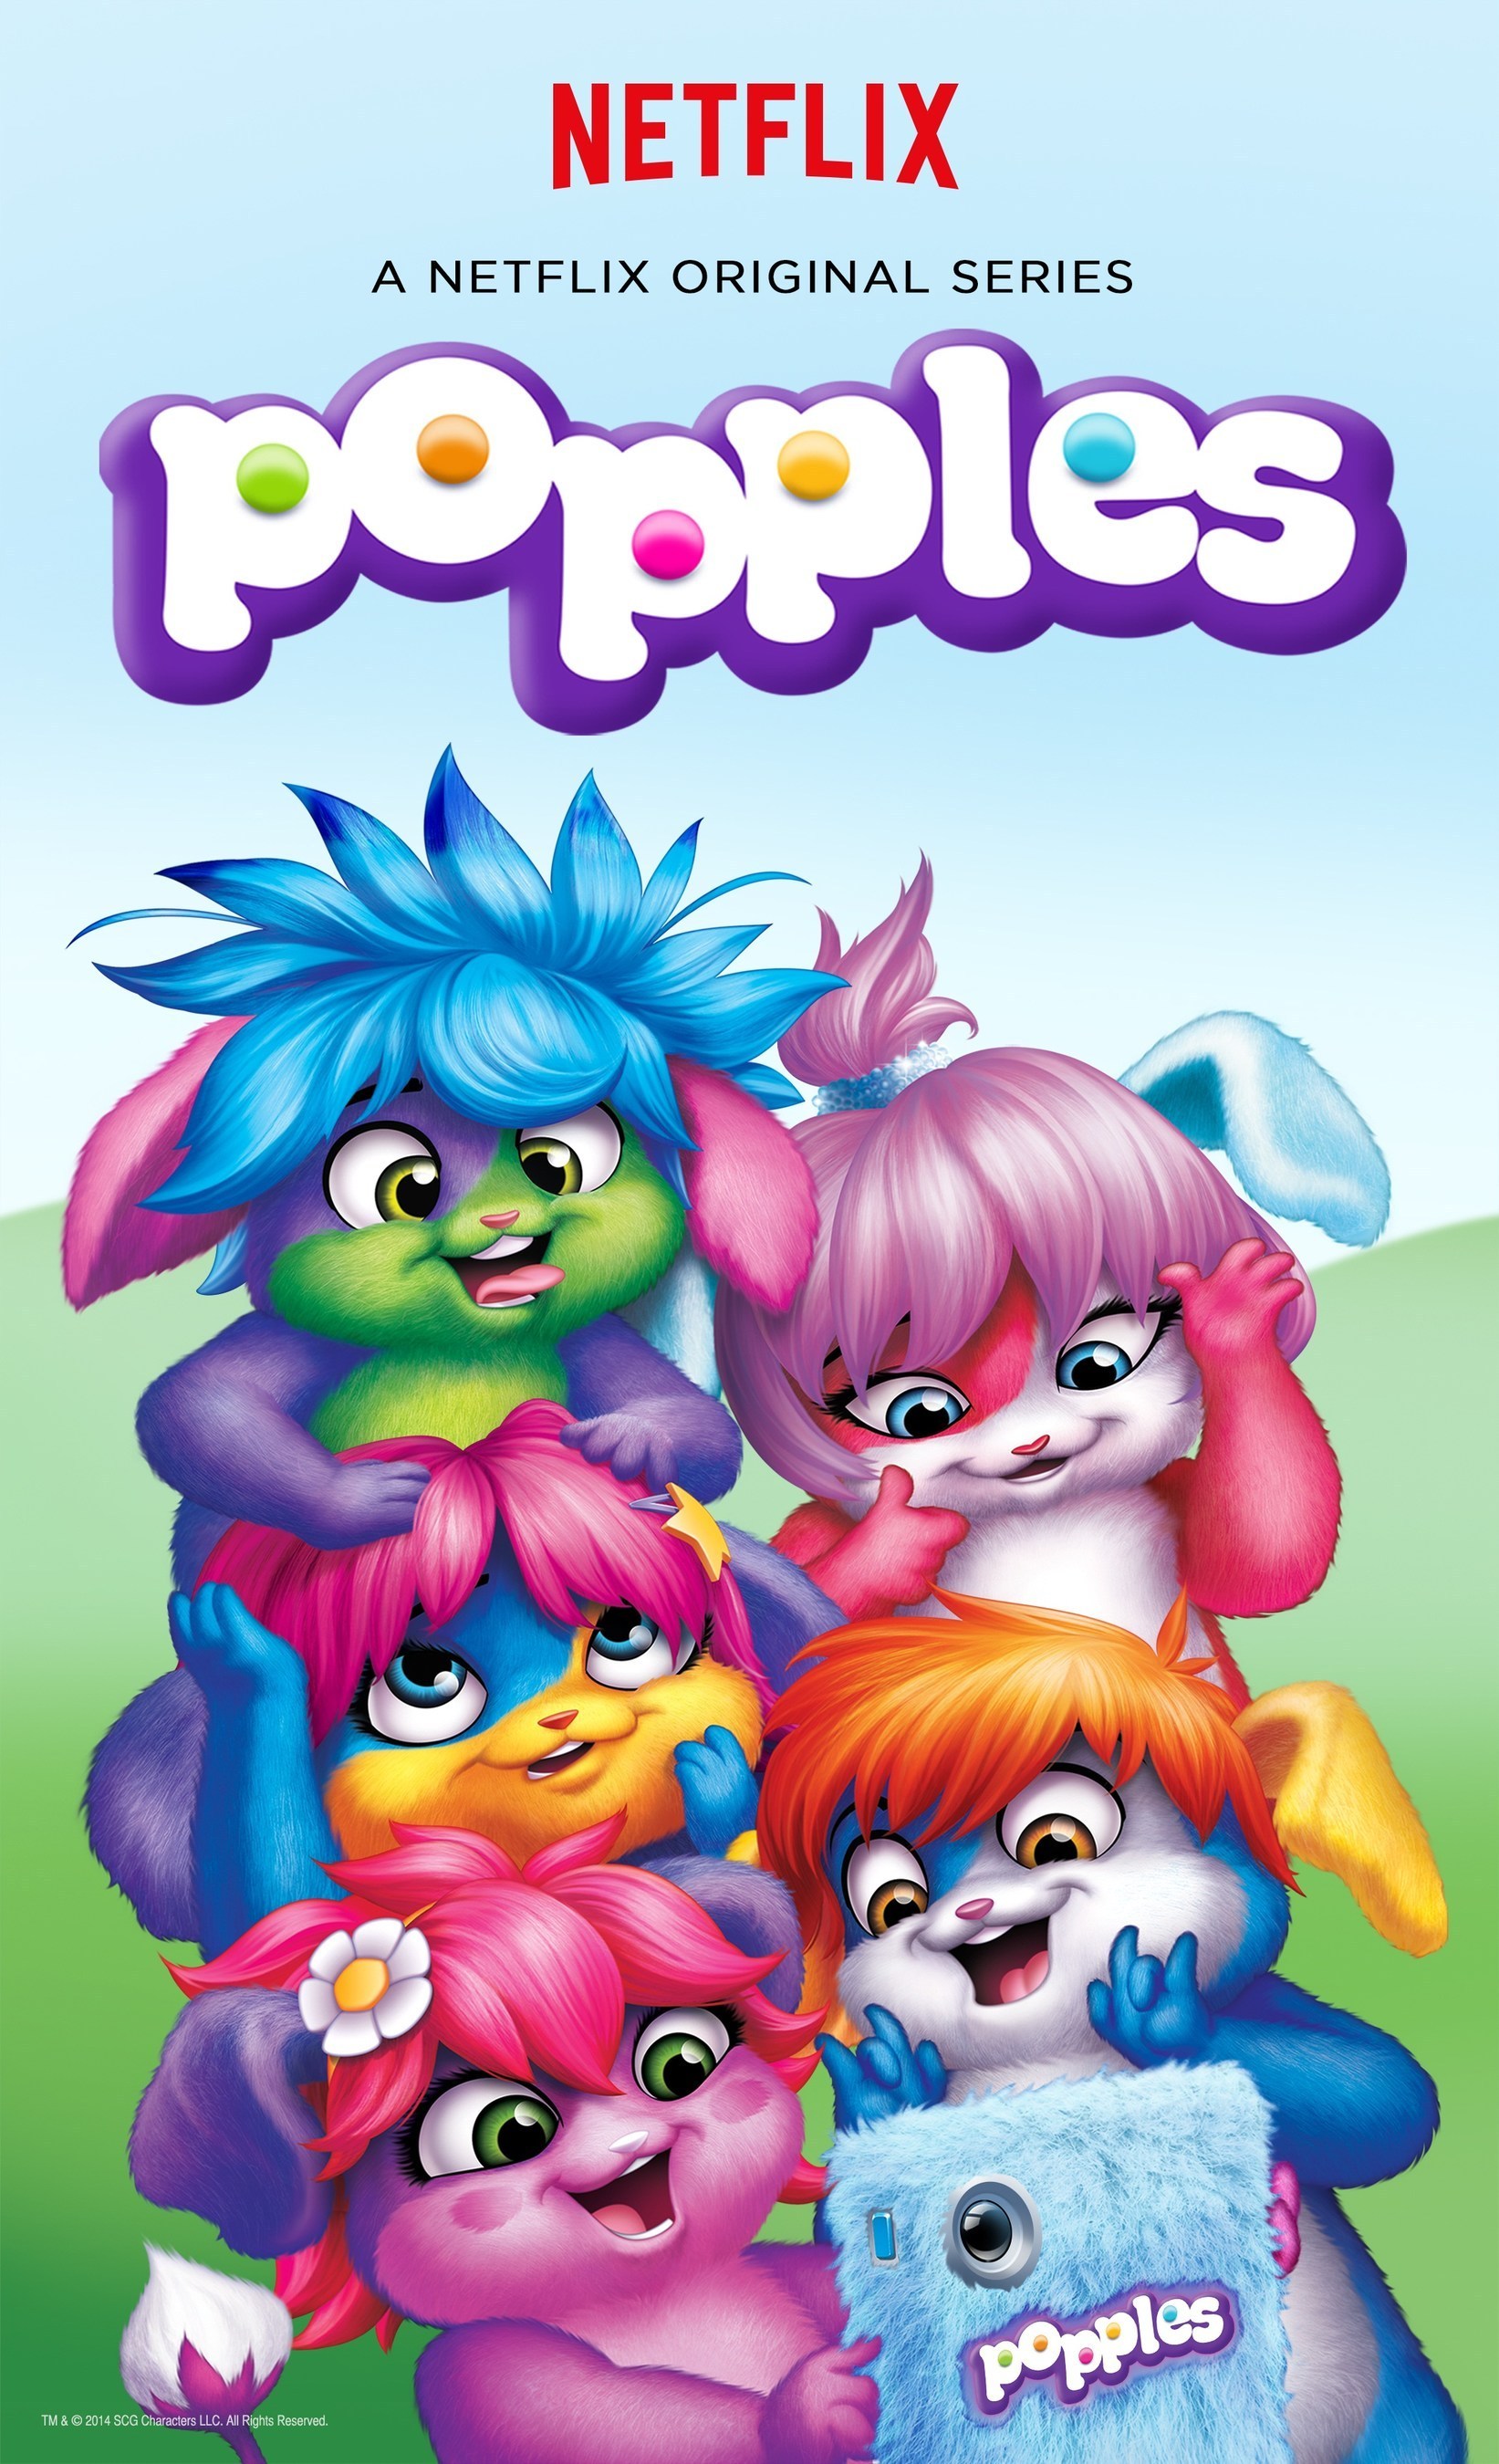 Popples are getting their own original Netflix series